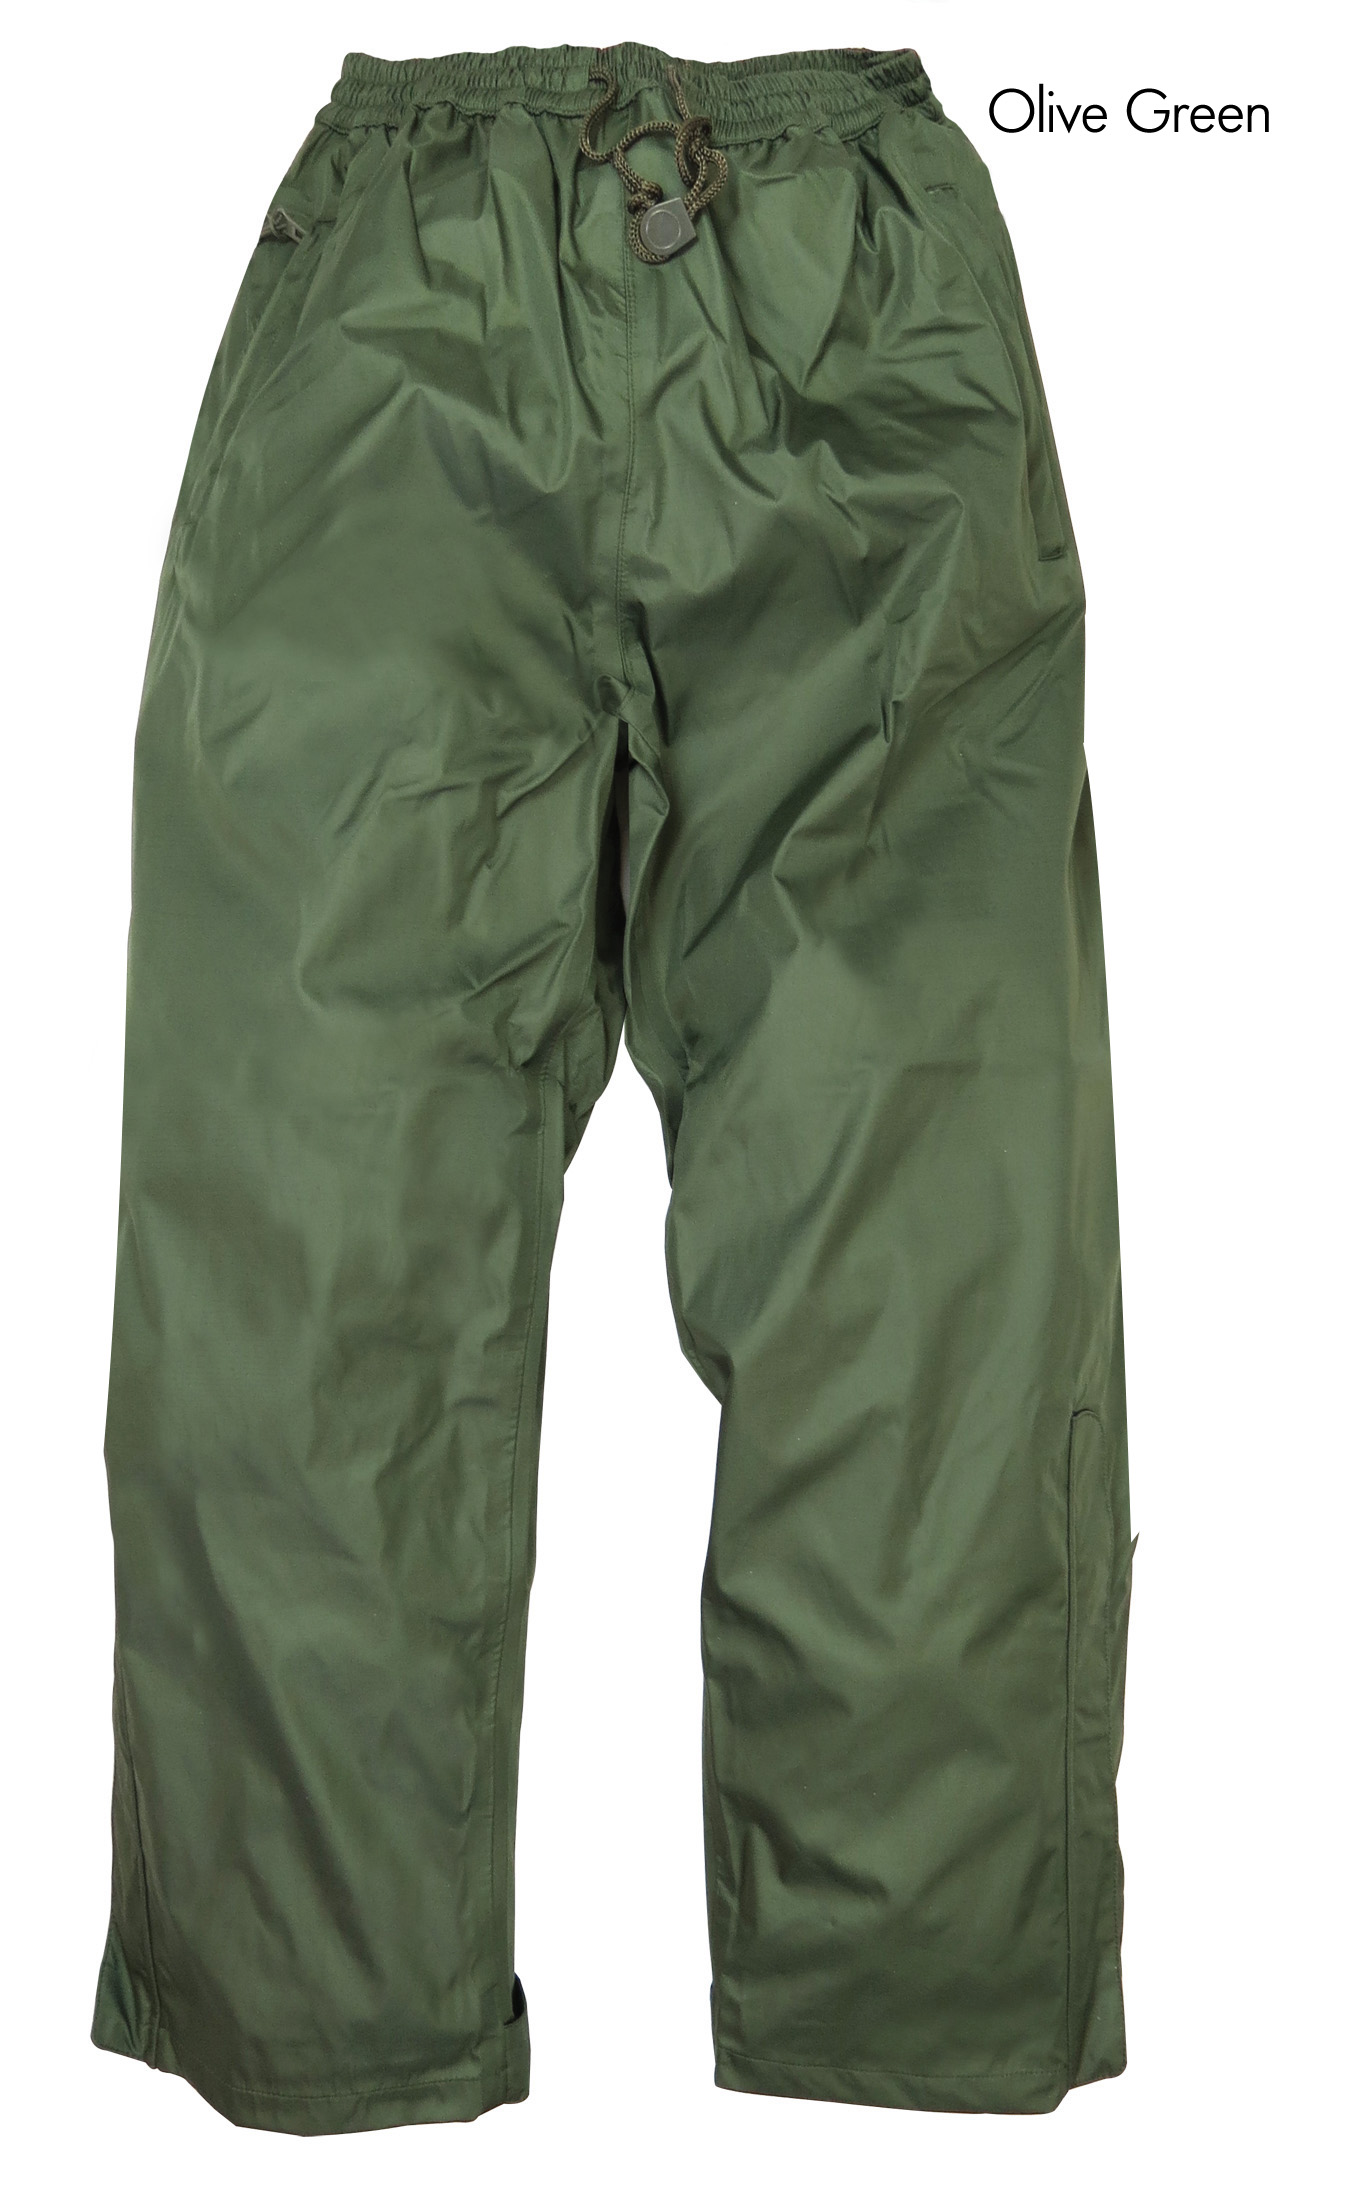 New Waterproof Breathable Trousers by Highlander